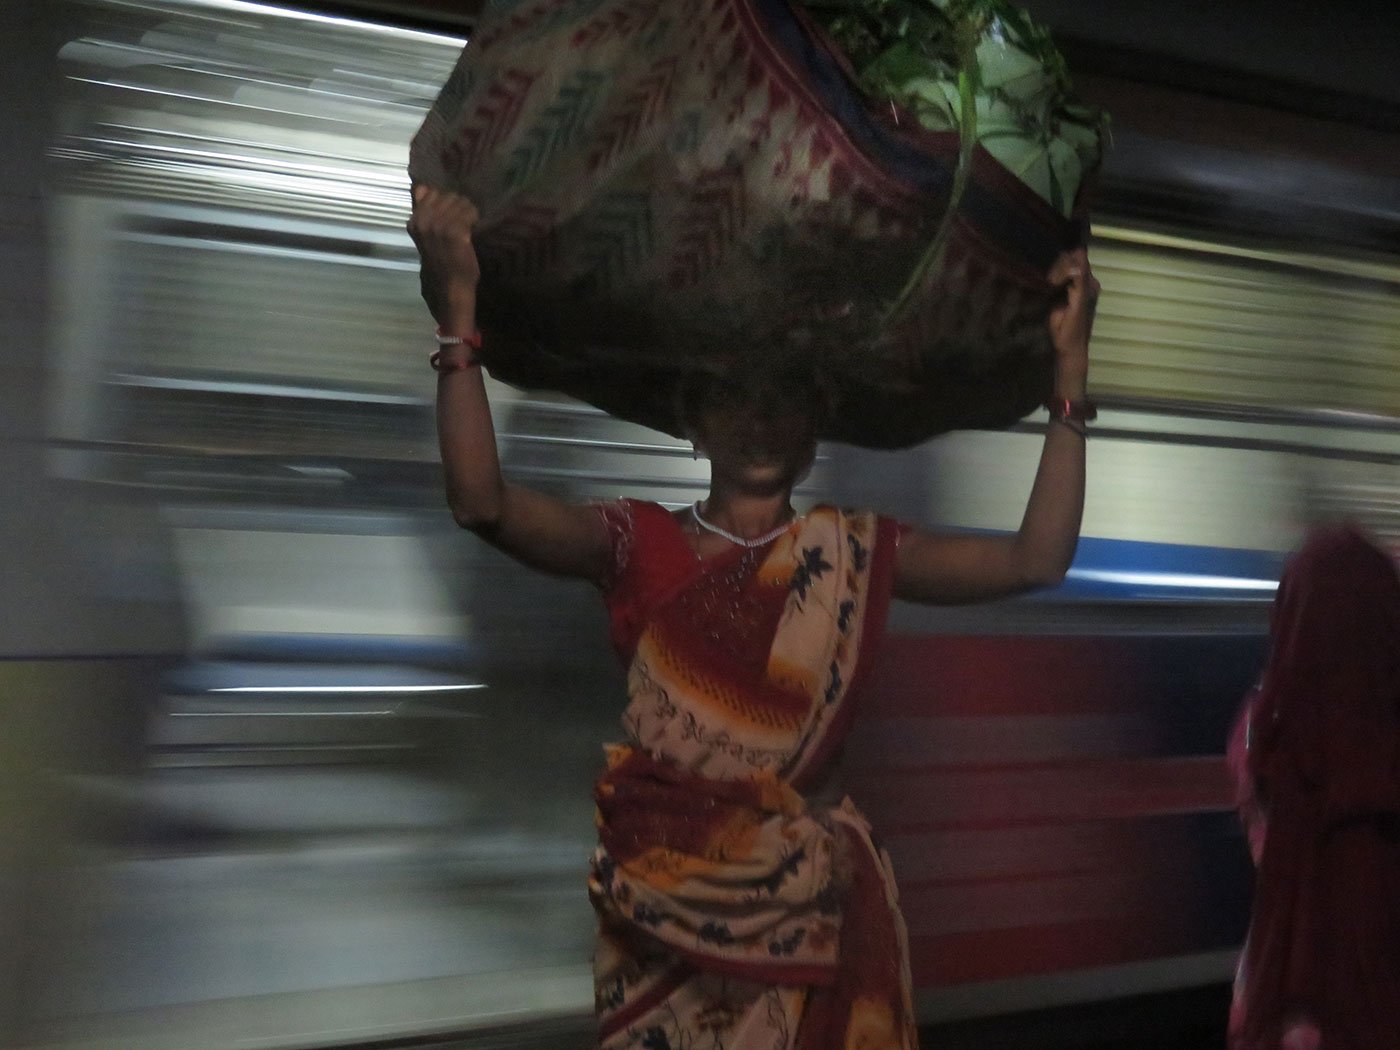 Tulshi, carrying a 35 kg load of palash leaves wrapped in an old sari, at the train station